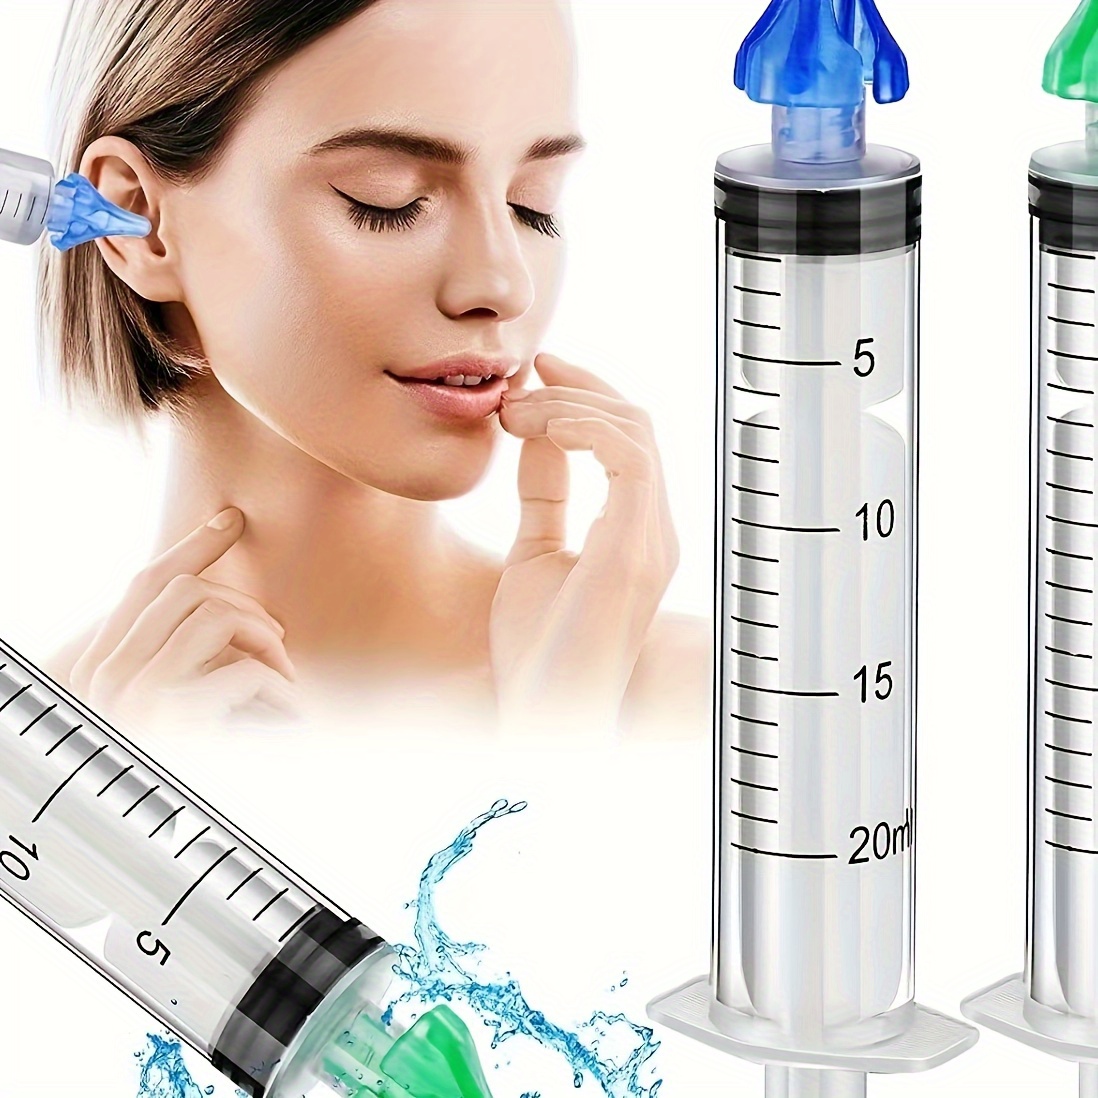 

1pc Ear Washer Ear Irrigator, Liquid Infusion With Nozzle, Can Be Used For Ear Tunnel Cleaning